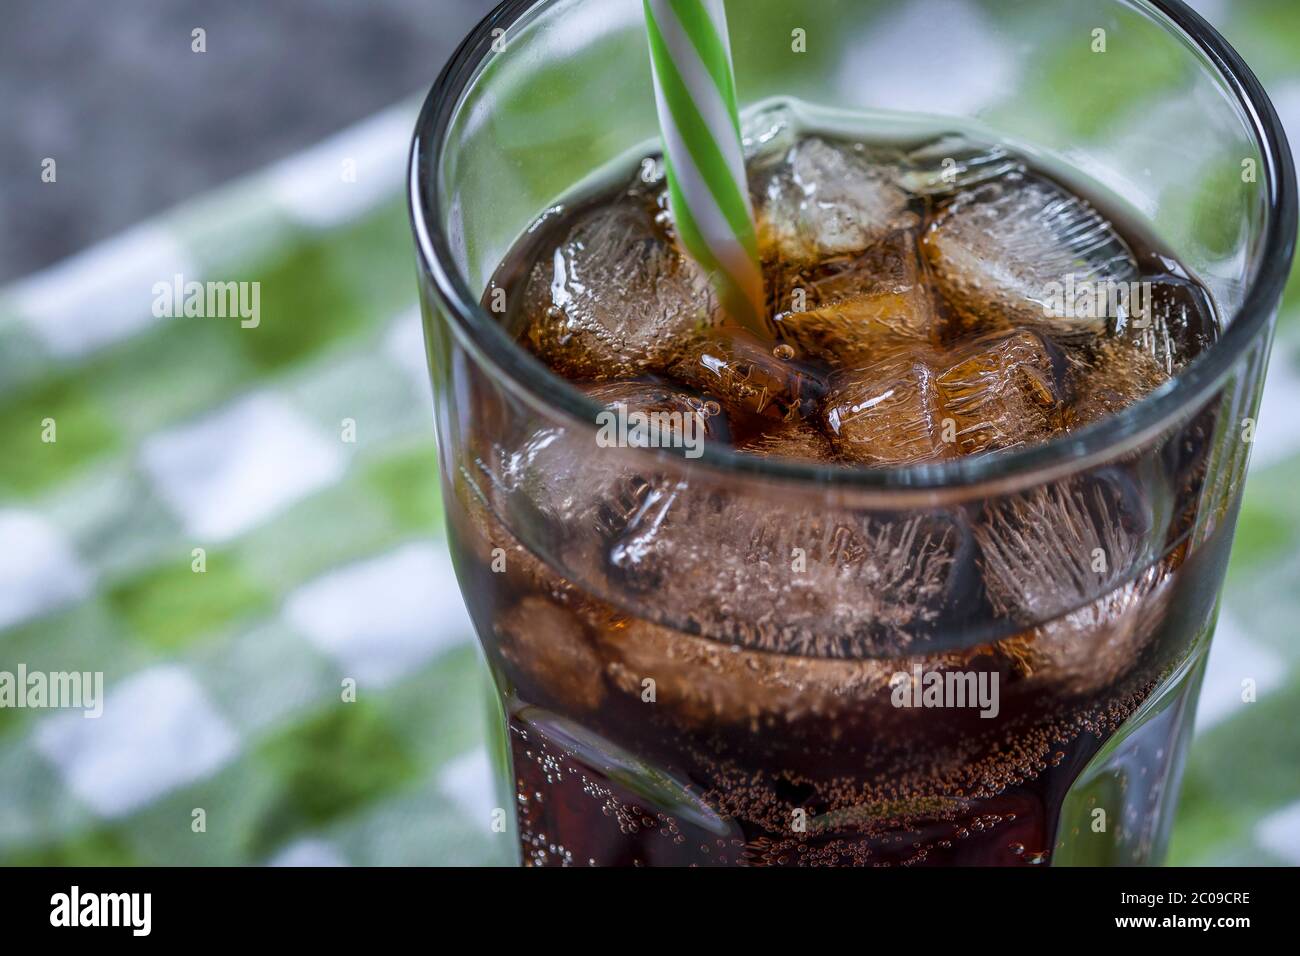 Sweet chilled drink - salvation from hot weather. Stock Photo